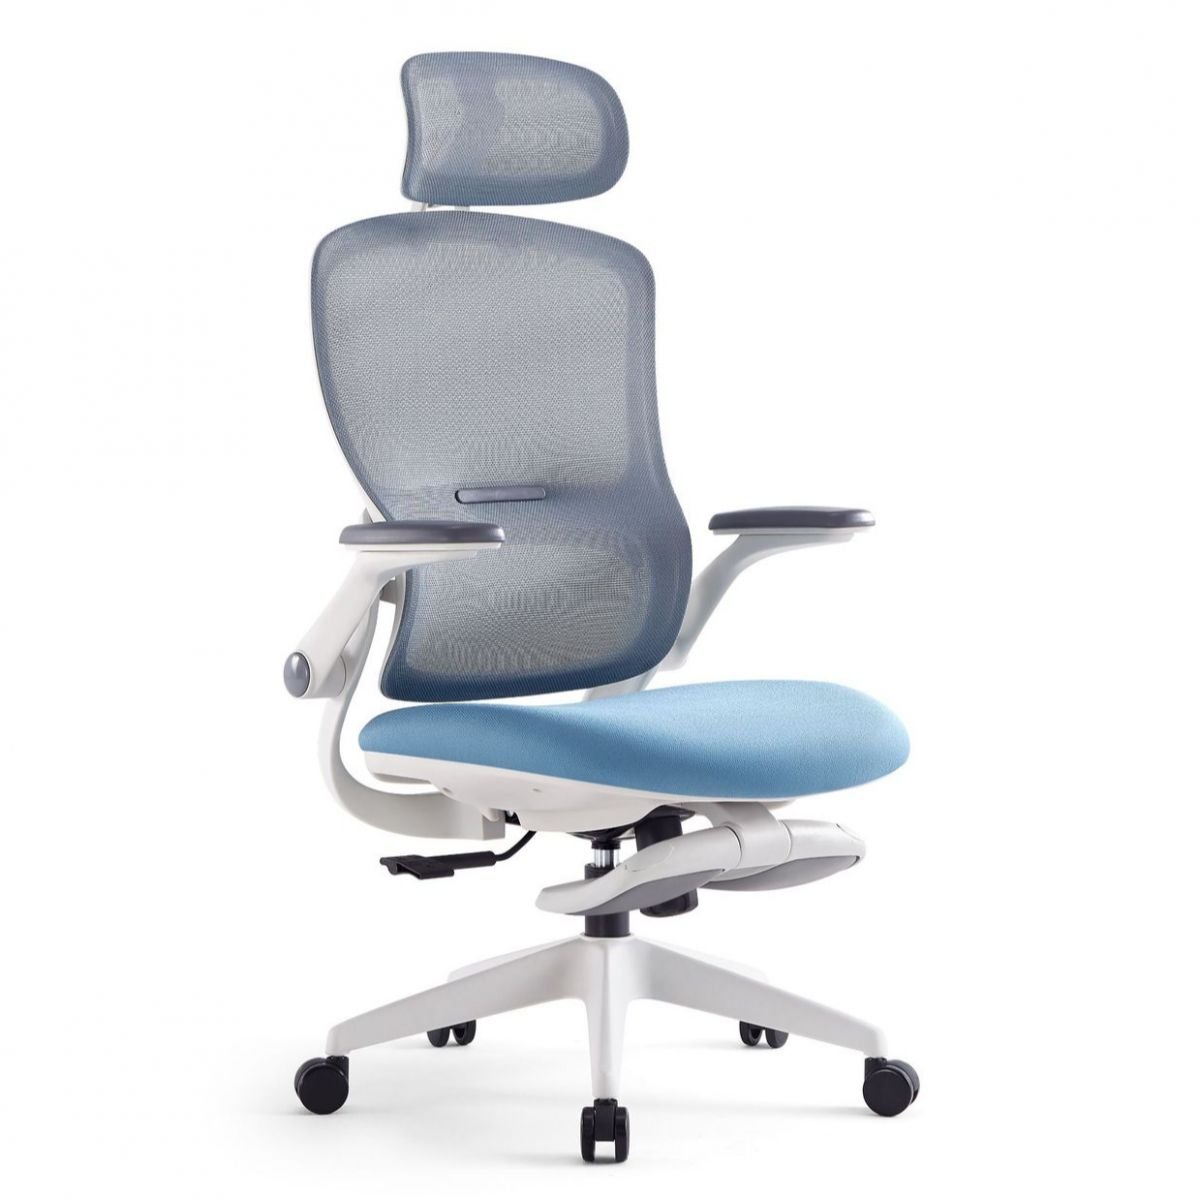 Minimalist Flip-Up Armrest Swivel Lifting Ergonomic Upholstered White Office Chairs with Headrest, Arms and Wheels, White, Casters Included, With Footrest